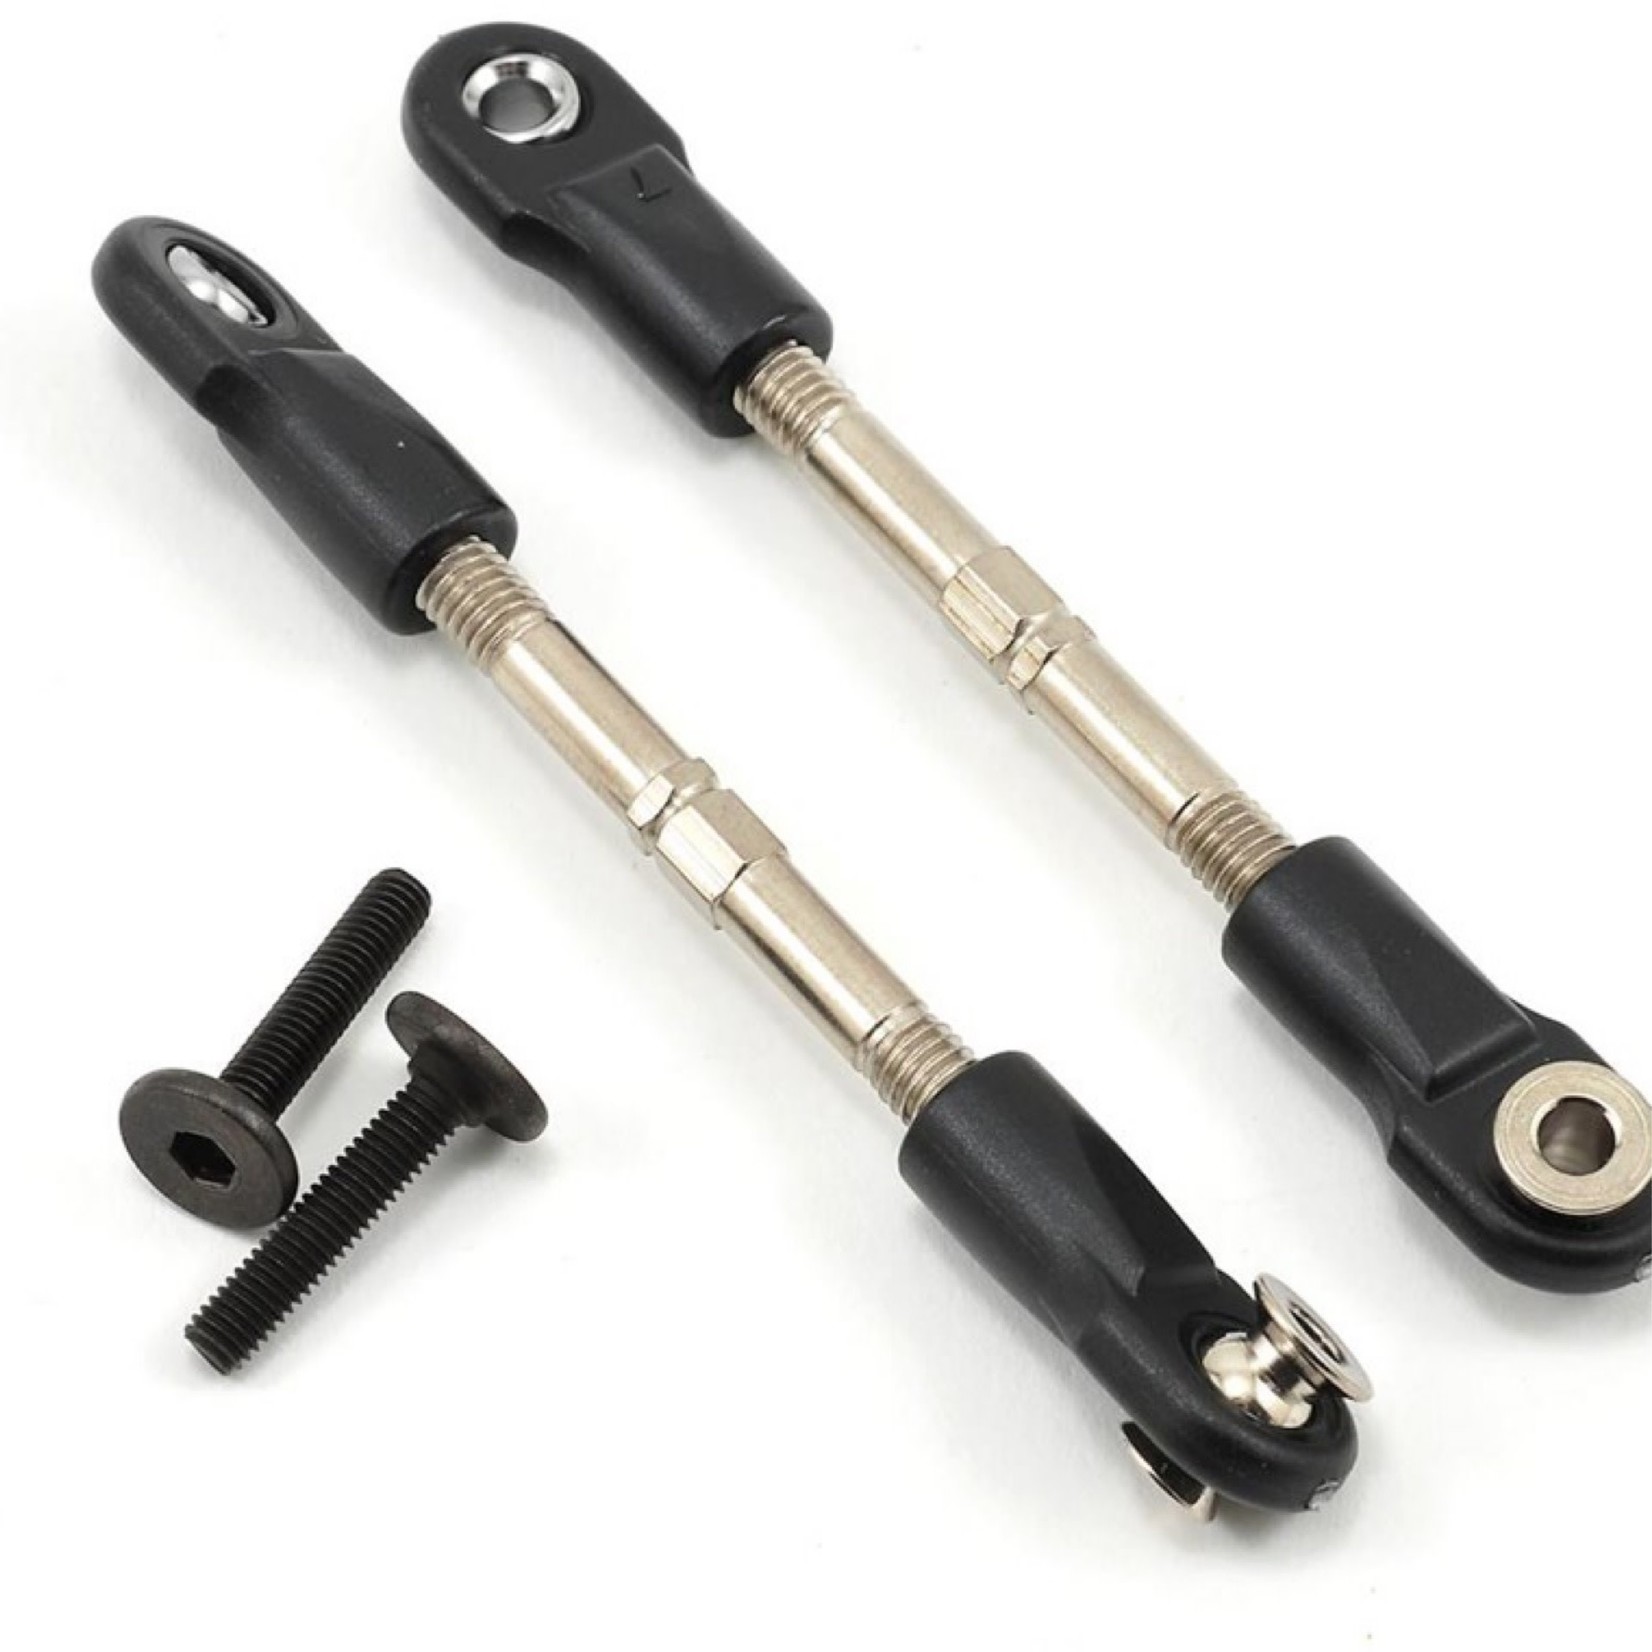 Traxxas Traxxas Bandit 47mm Front Camber Link Turnbuckle Set (2) #2444